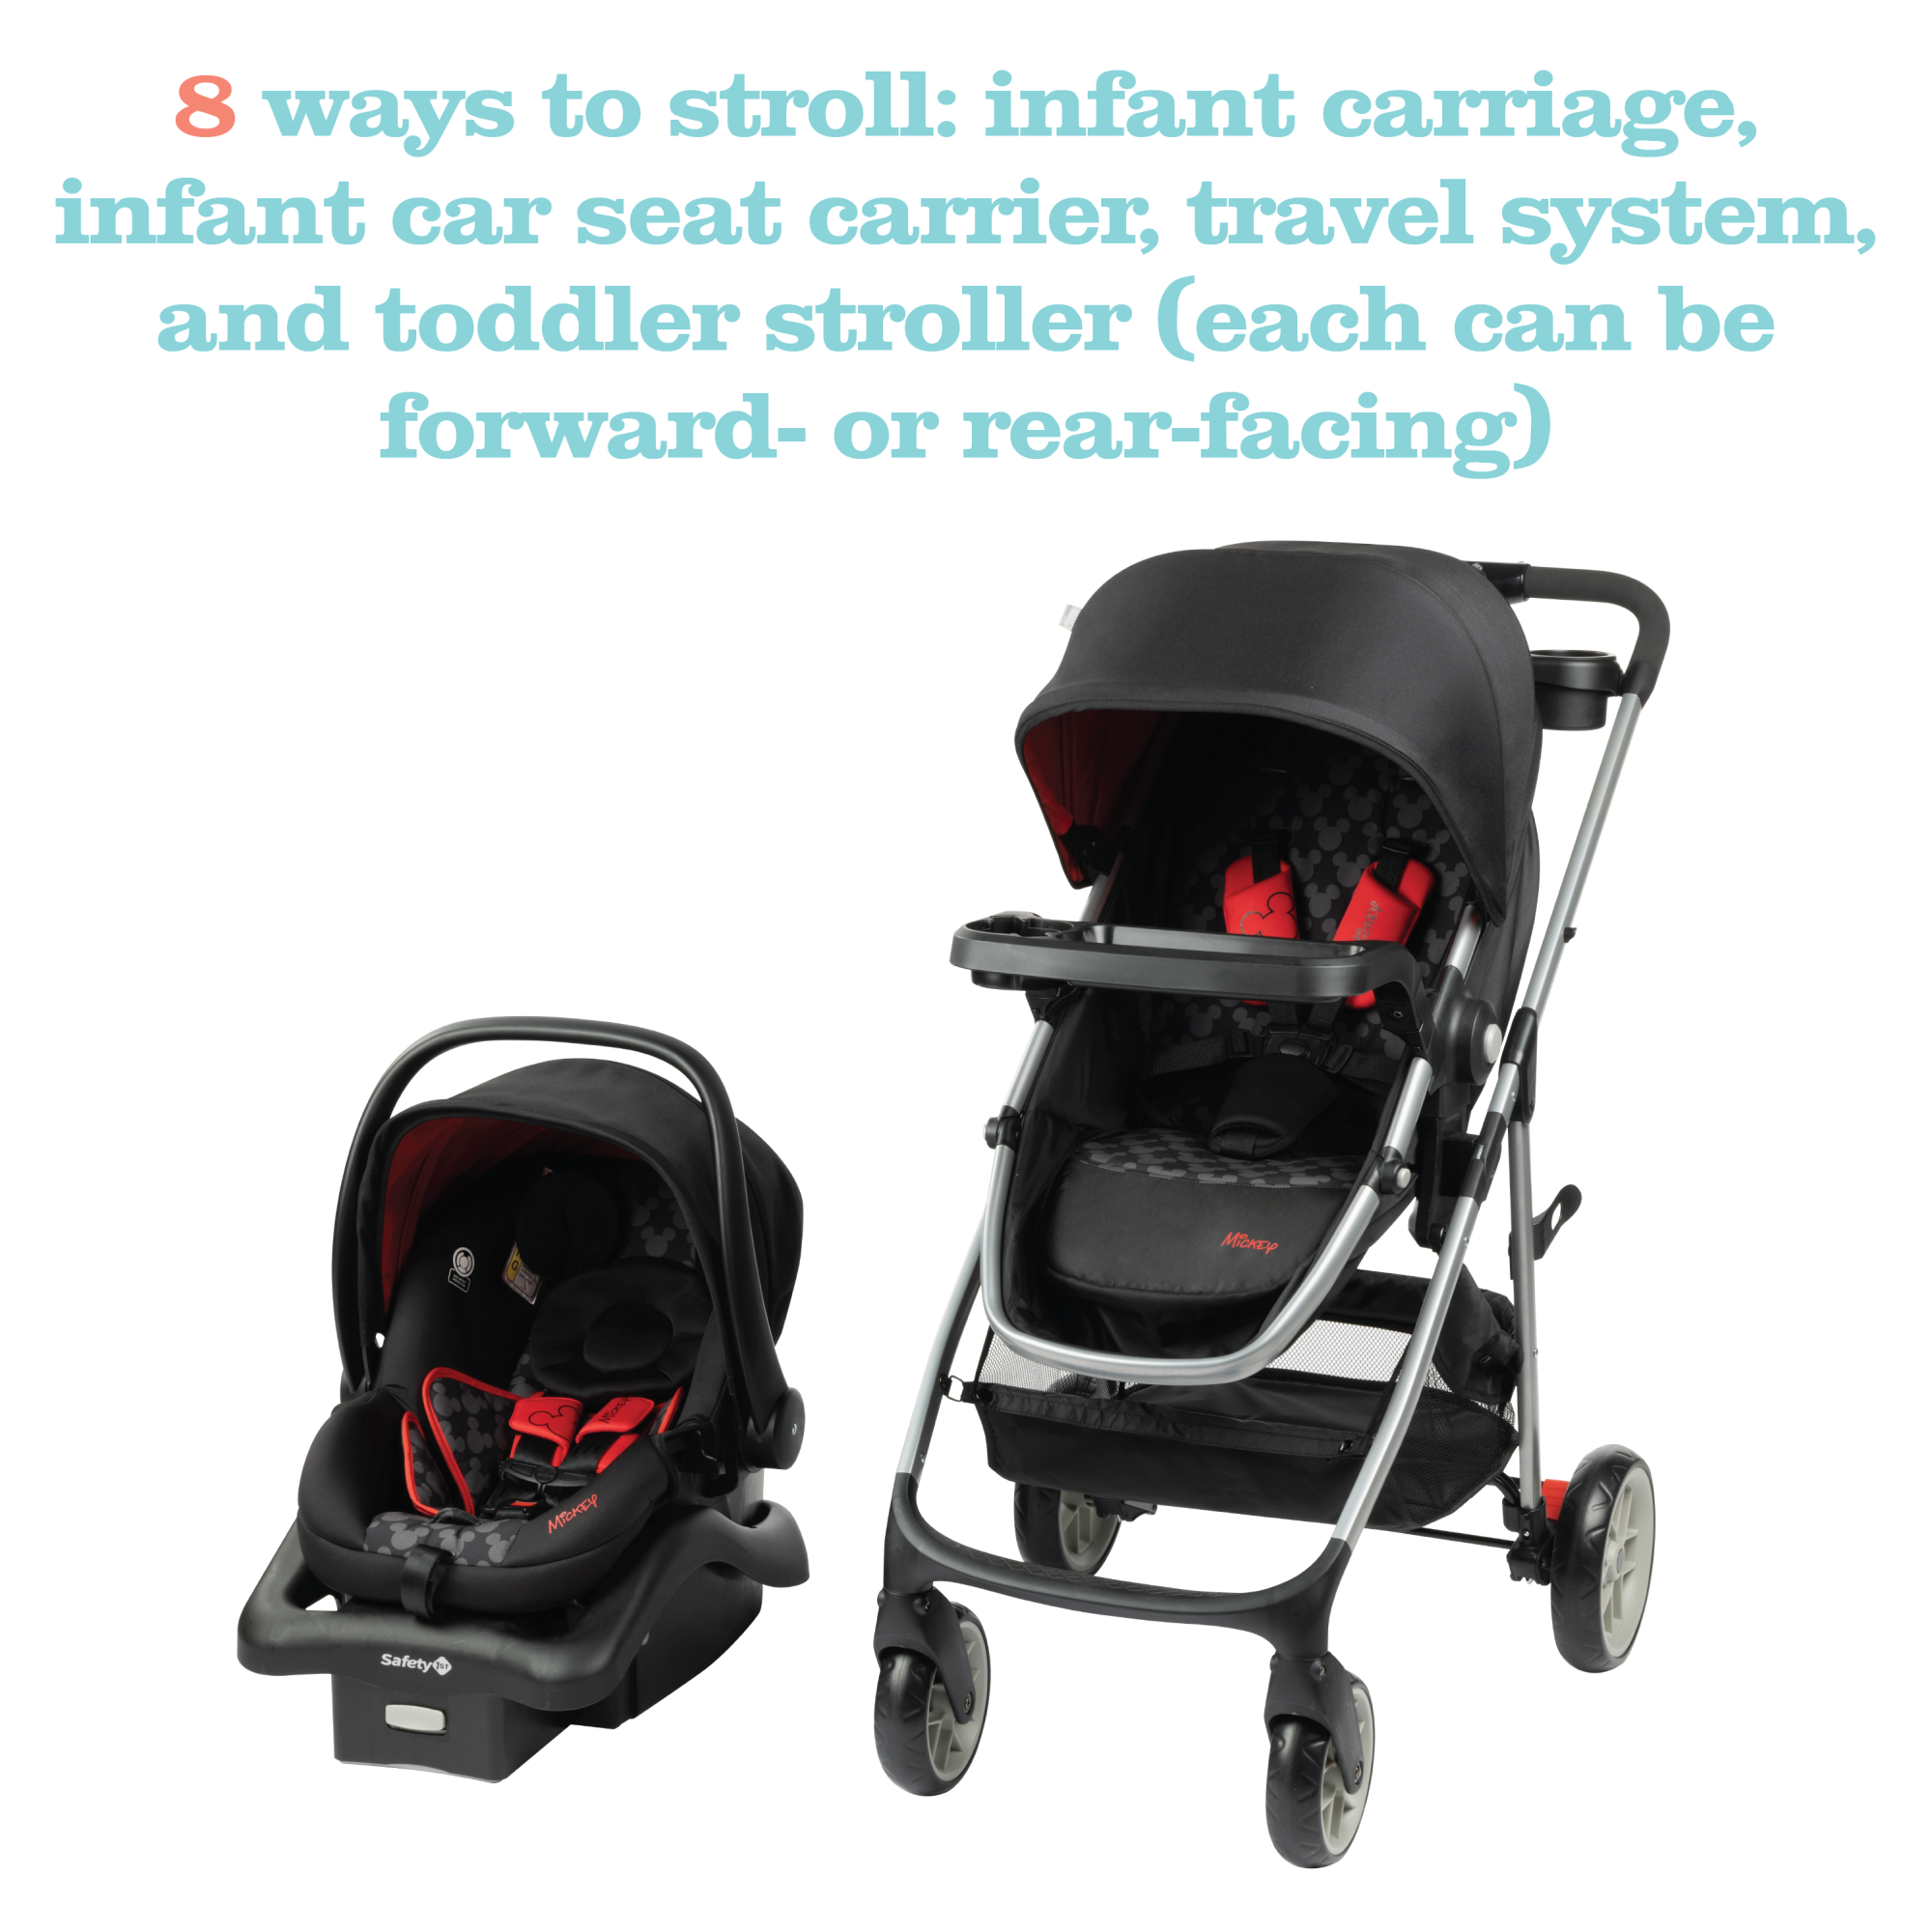 Disney Baby Grow and Go™ Modular Travel System - 8 ways to stroll: infant carriage, infant car seat carrier, travel system, and toddler stroller (each can be forward- or rear-facing)